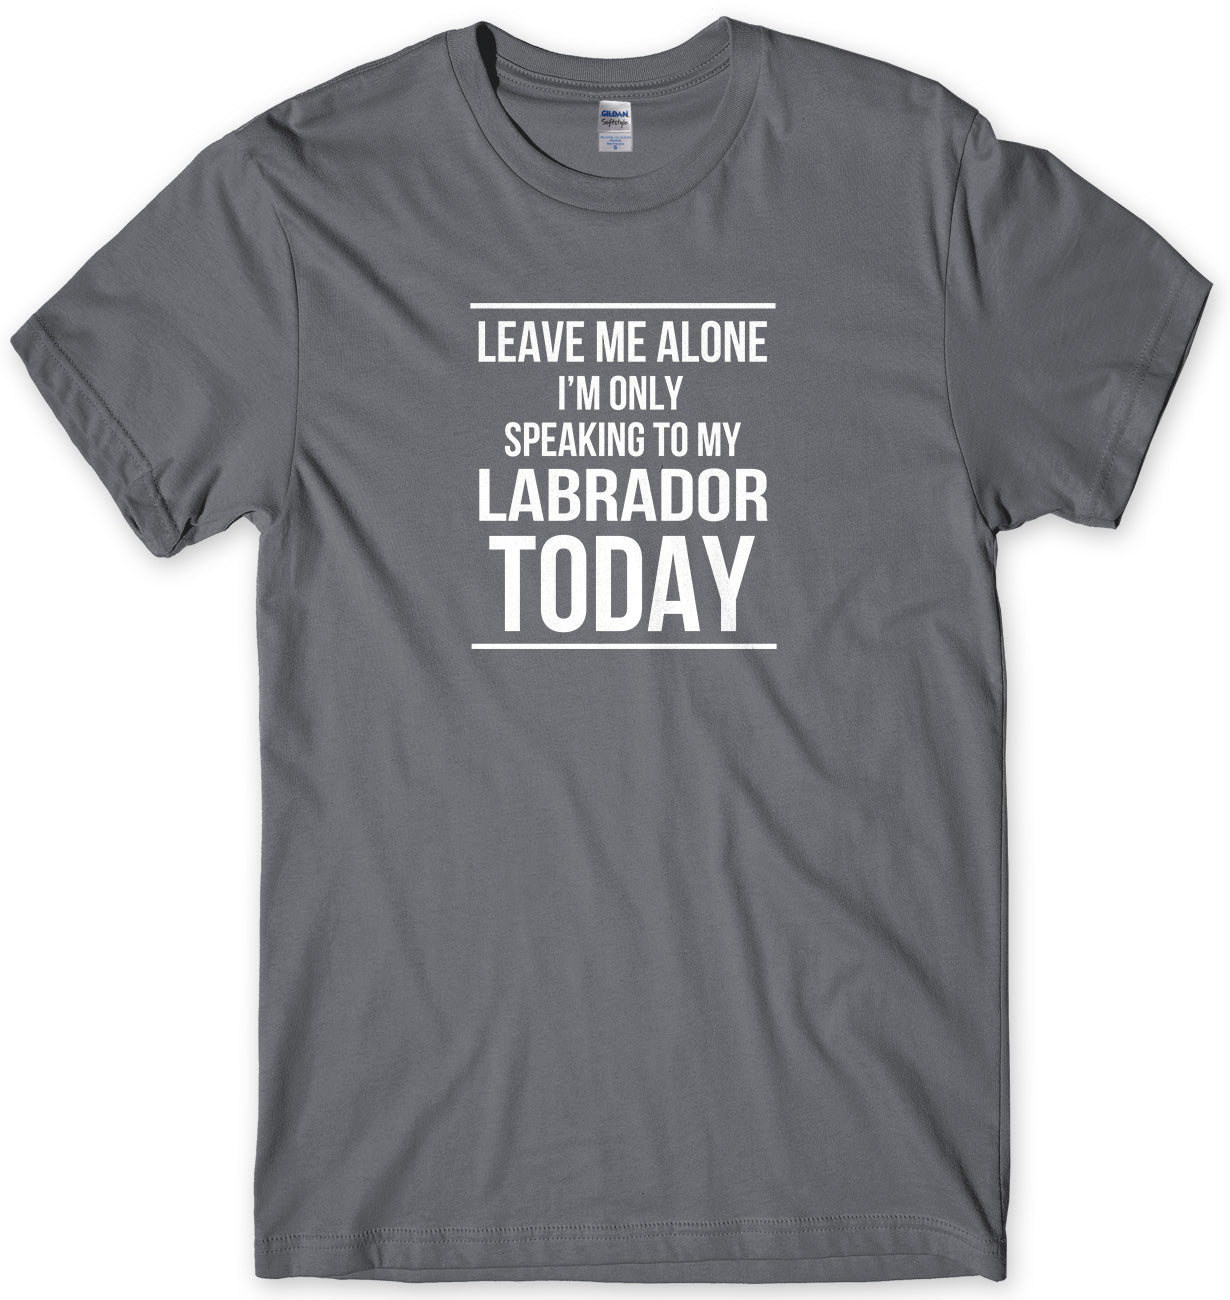 LEAVE ME ALONE I'M ONLY SPEAKING TO MY LABRADOR TODAY MENS FUNNY SLOGAN UNISEX T-SHIRT